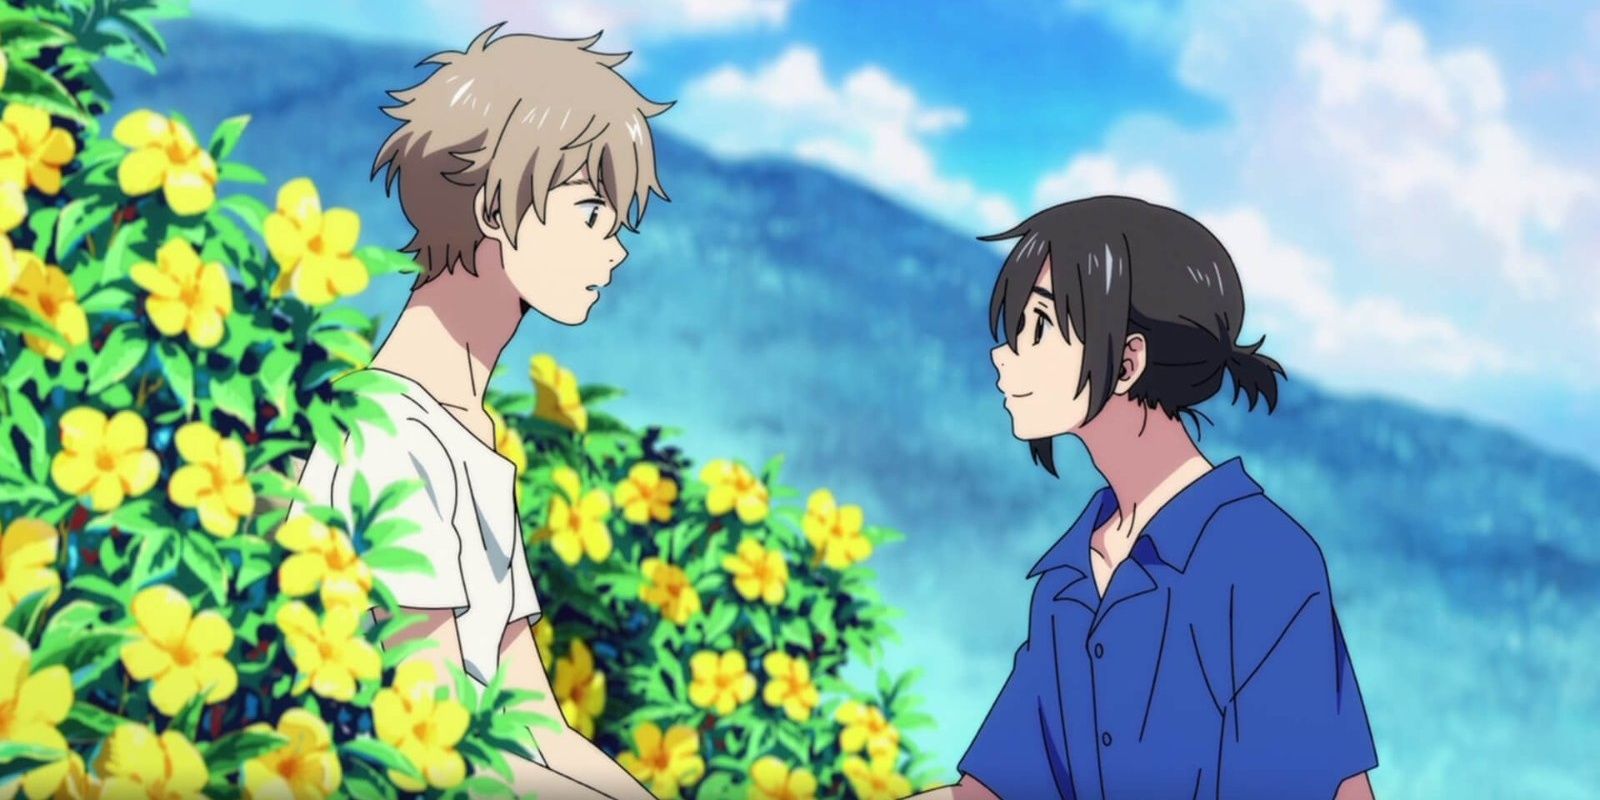 Shun and Mio talk in The Stranger by the Beach, also known as The Stranger by the Shore